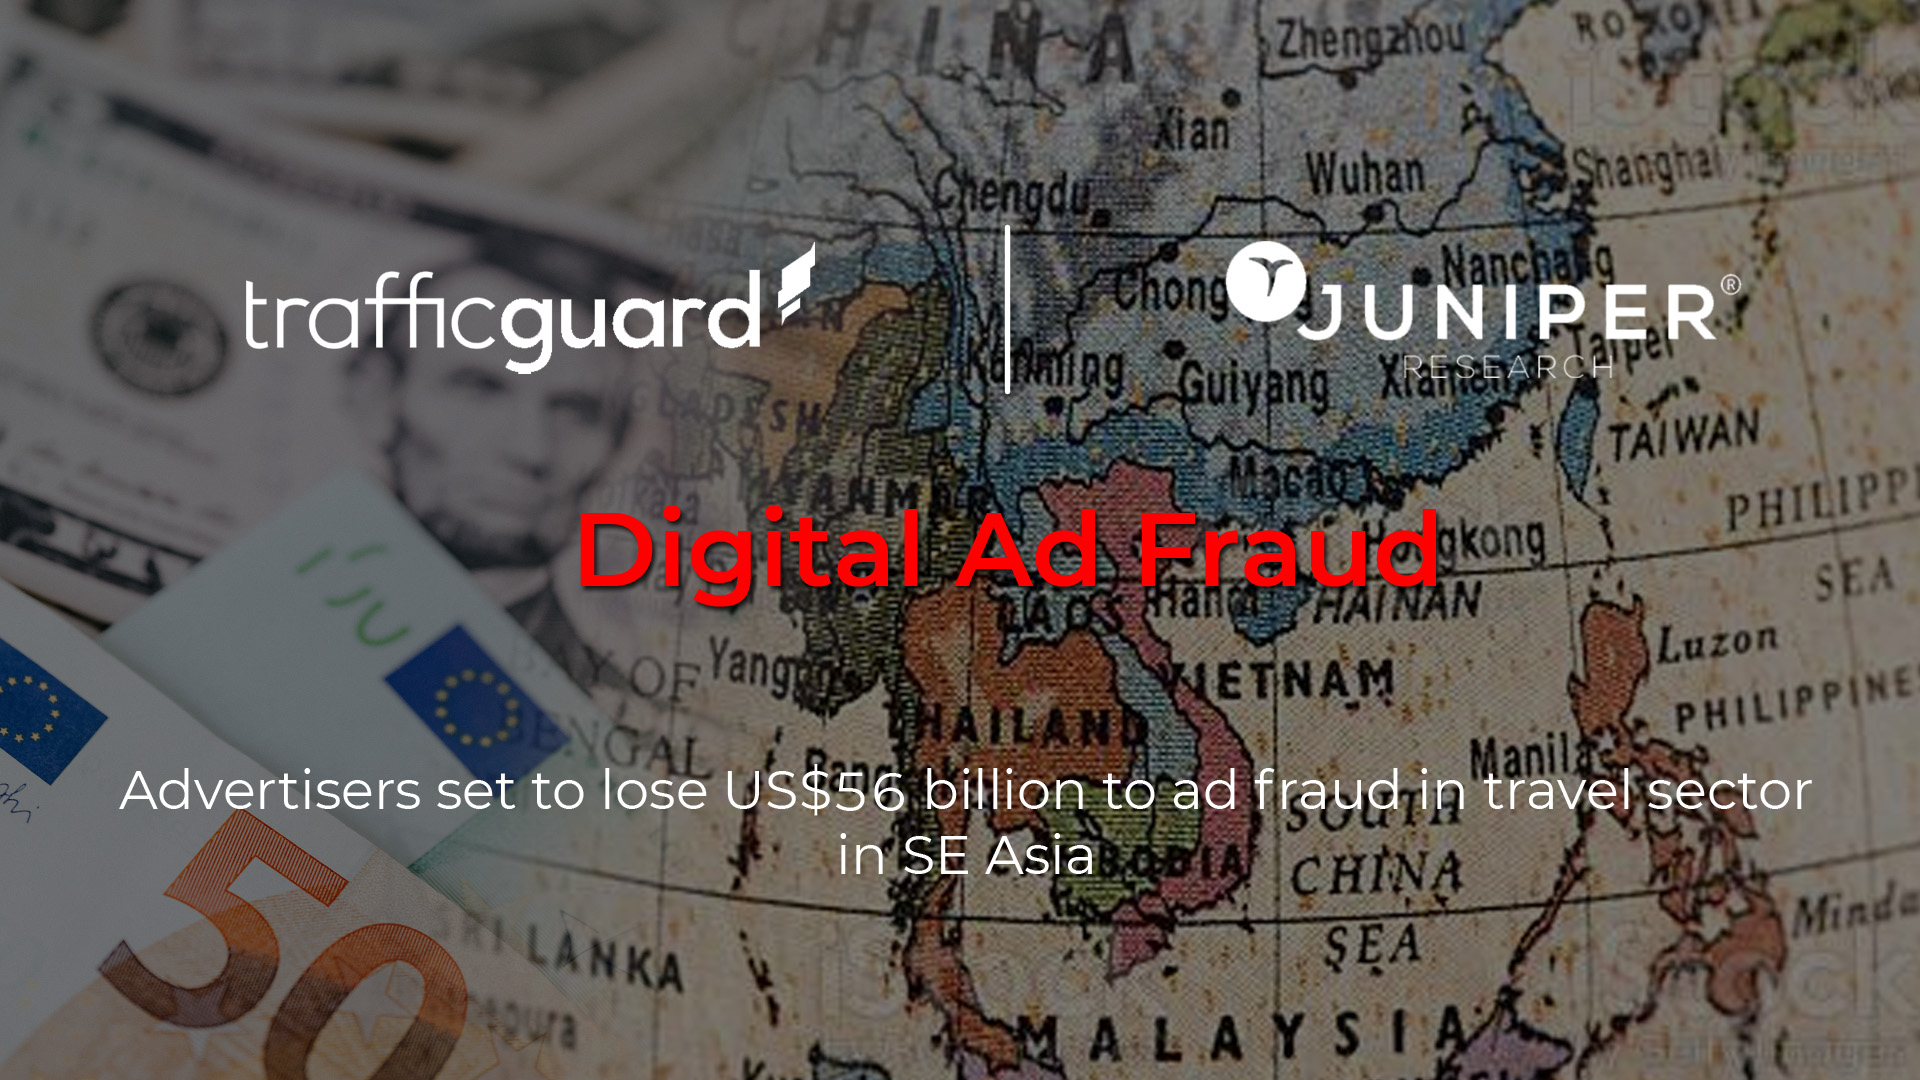 Advertisers set to lose US billion to ad fraud in travel sector in SE Asia